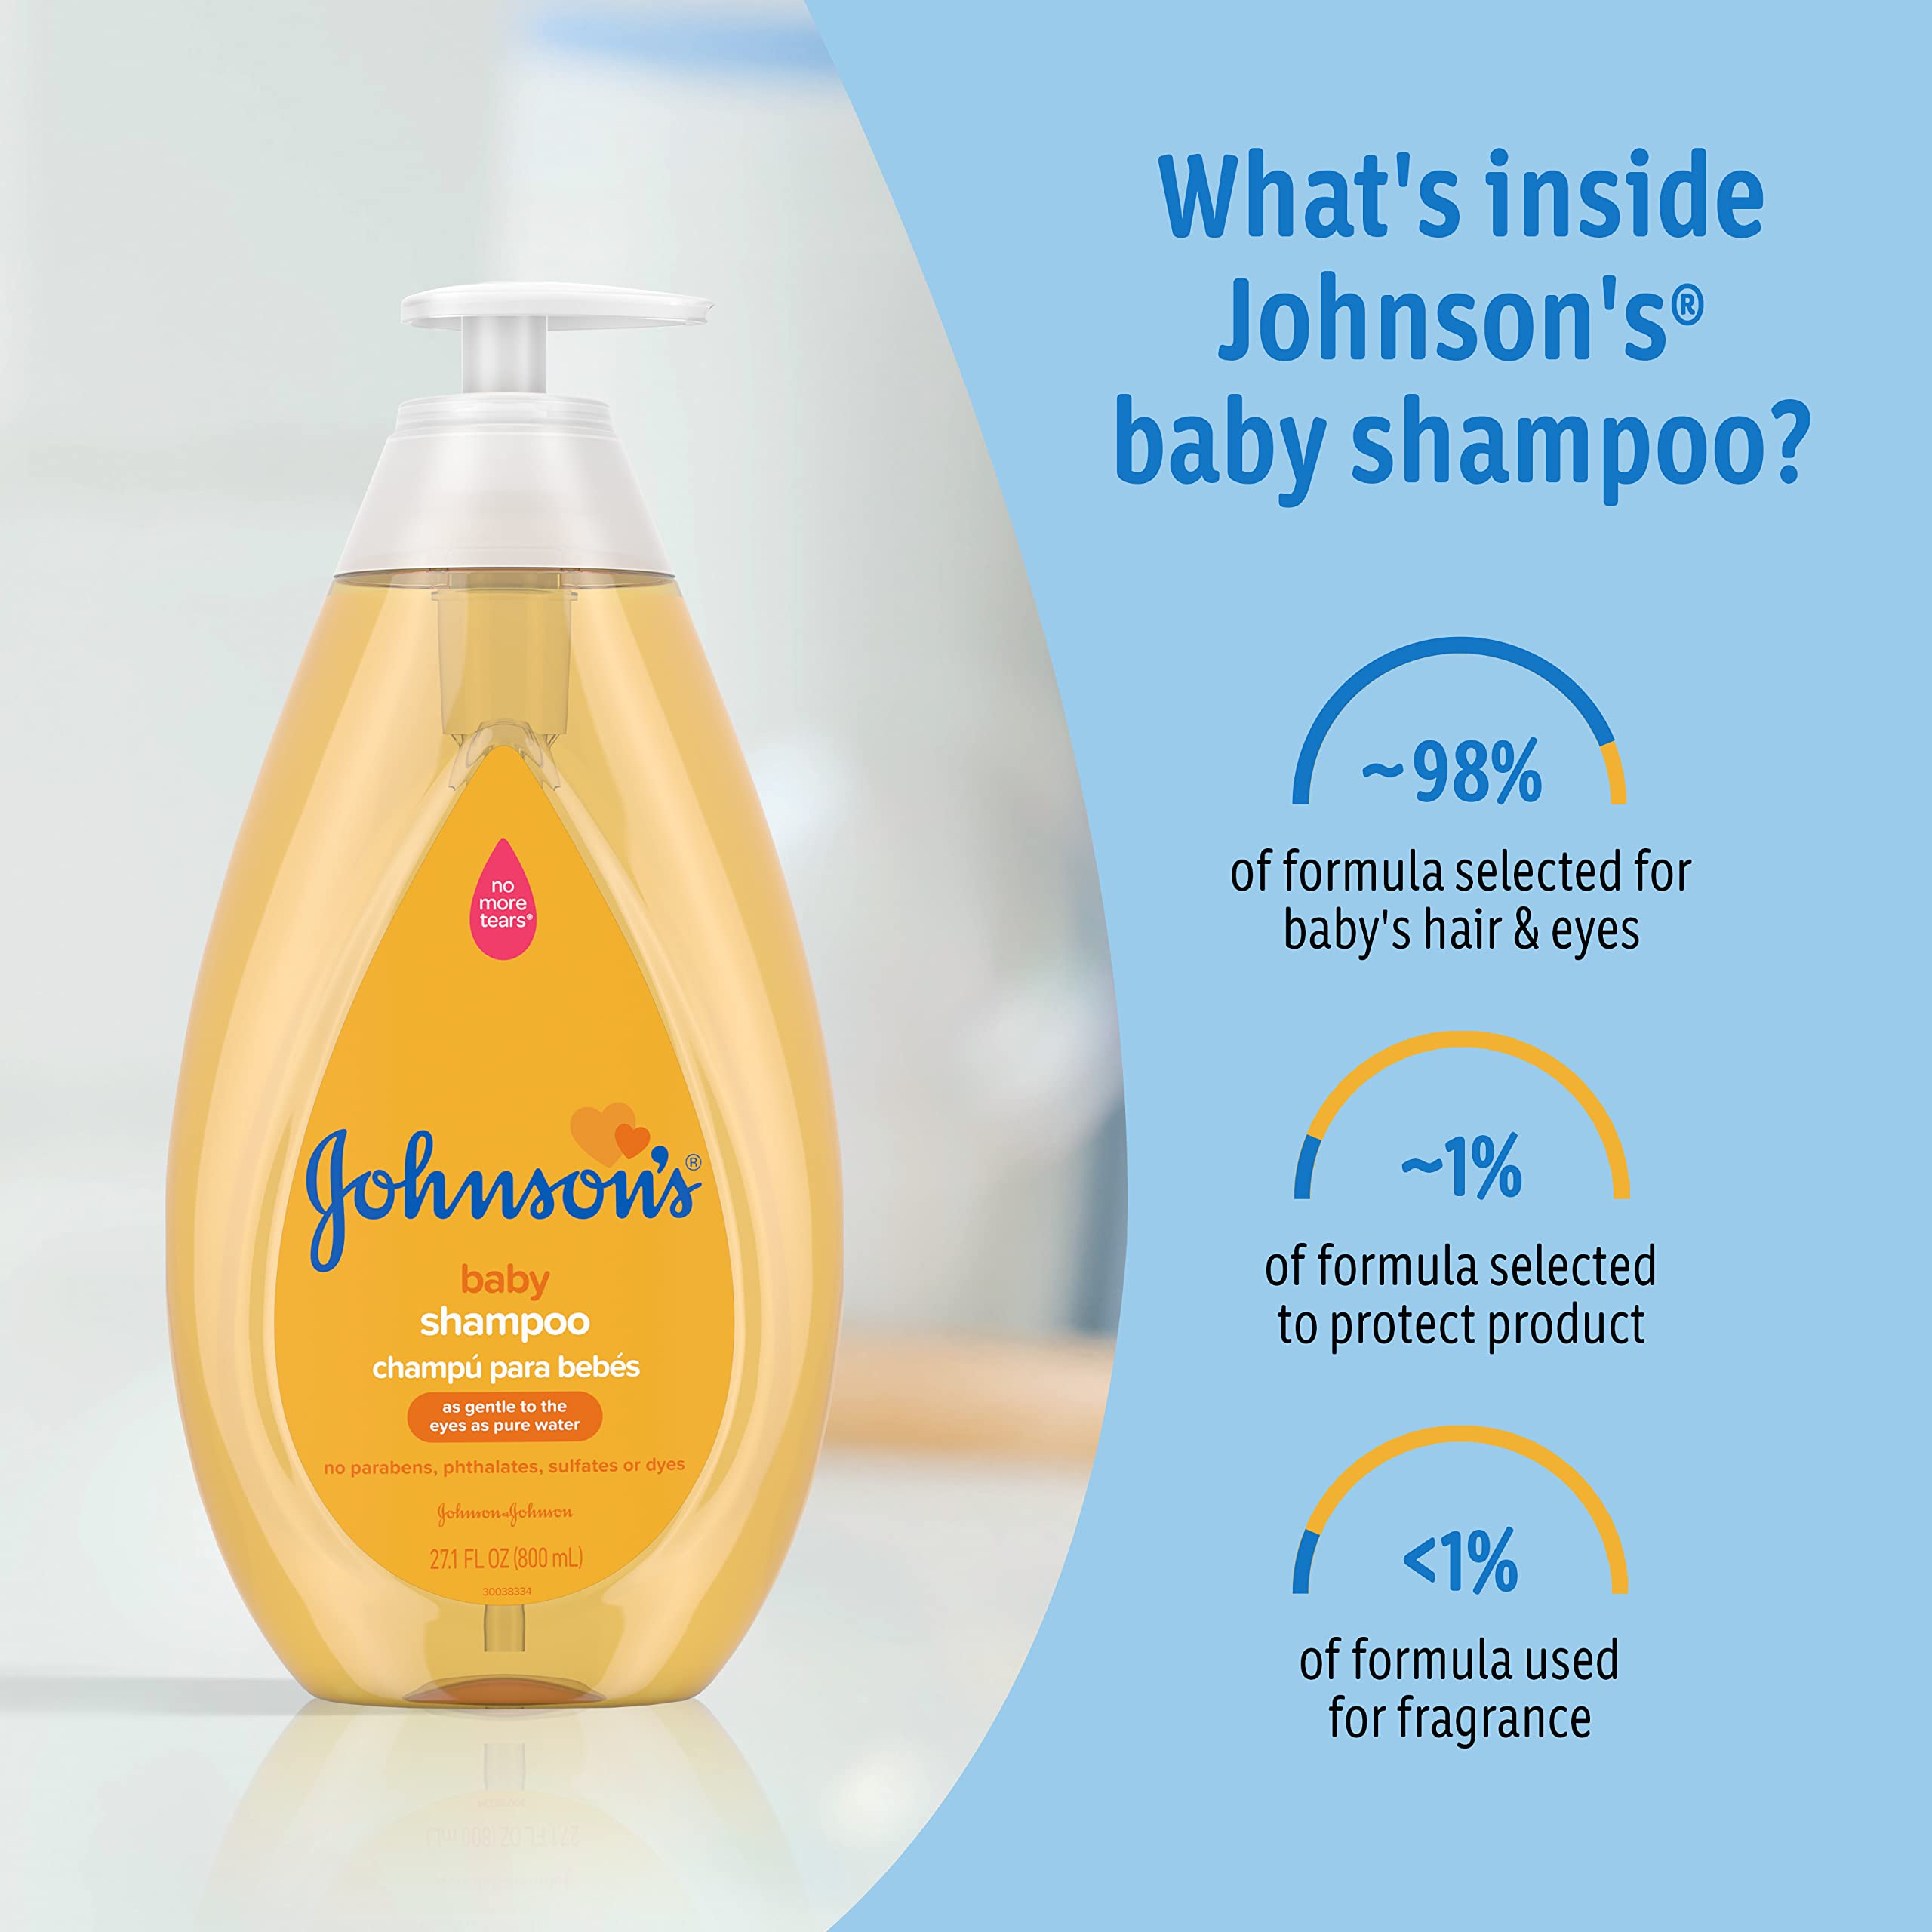 Johnson's Baby Shampoo with Tear-Free Formula, Shampoo for Baby's Delicate Scalp & Skin, Gently Washes Away Dirt & Germs, Paraben-, Phthalate-, Sulfate- & Dye-Free, 27.1 fl. oz